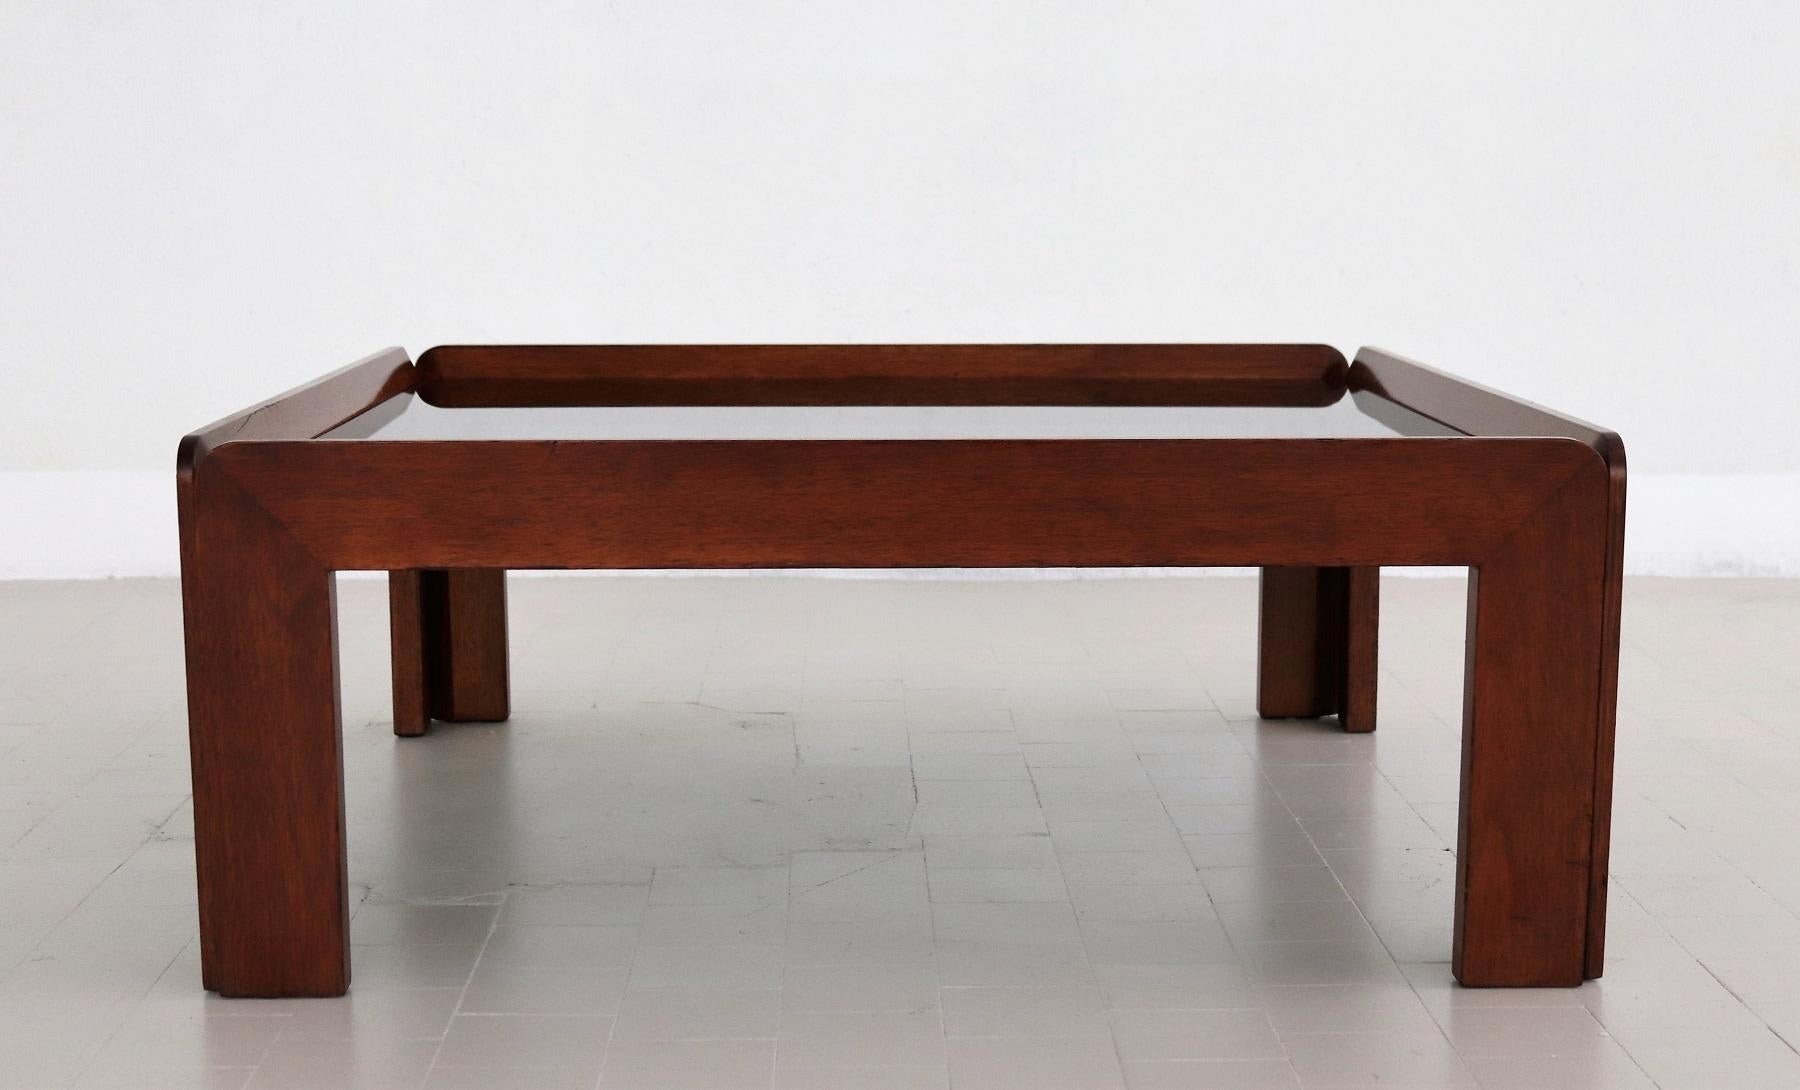 Mid-20th Century Italian Midcentury Square Coffee Table in Beechwood and Smoked Glass, 1960s For Sale